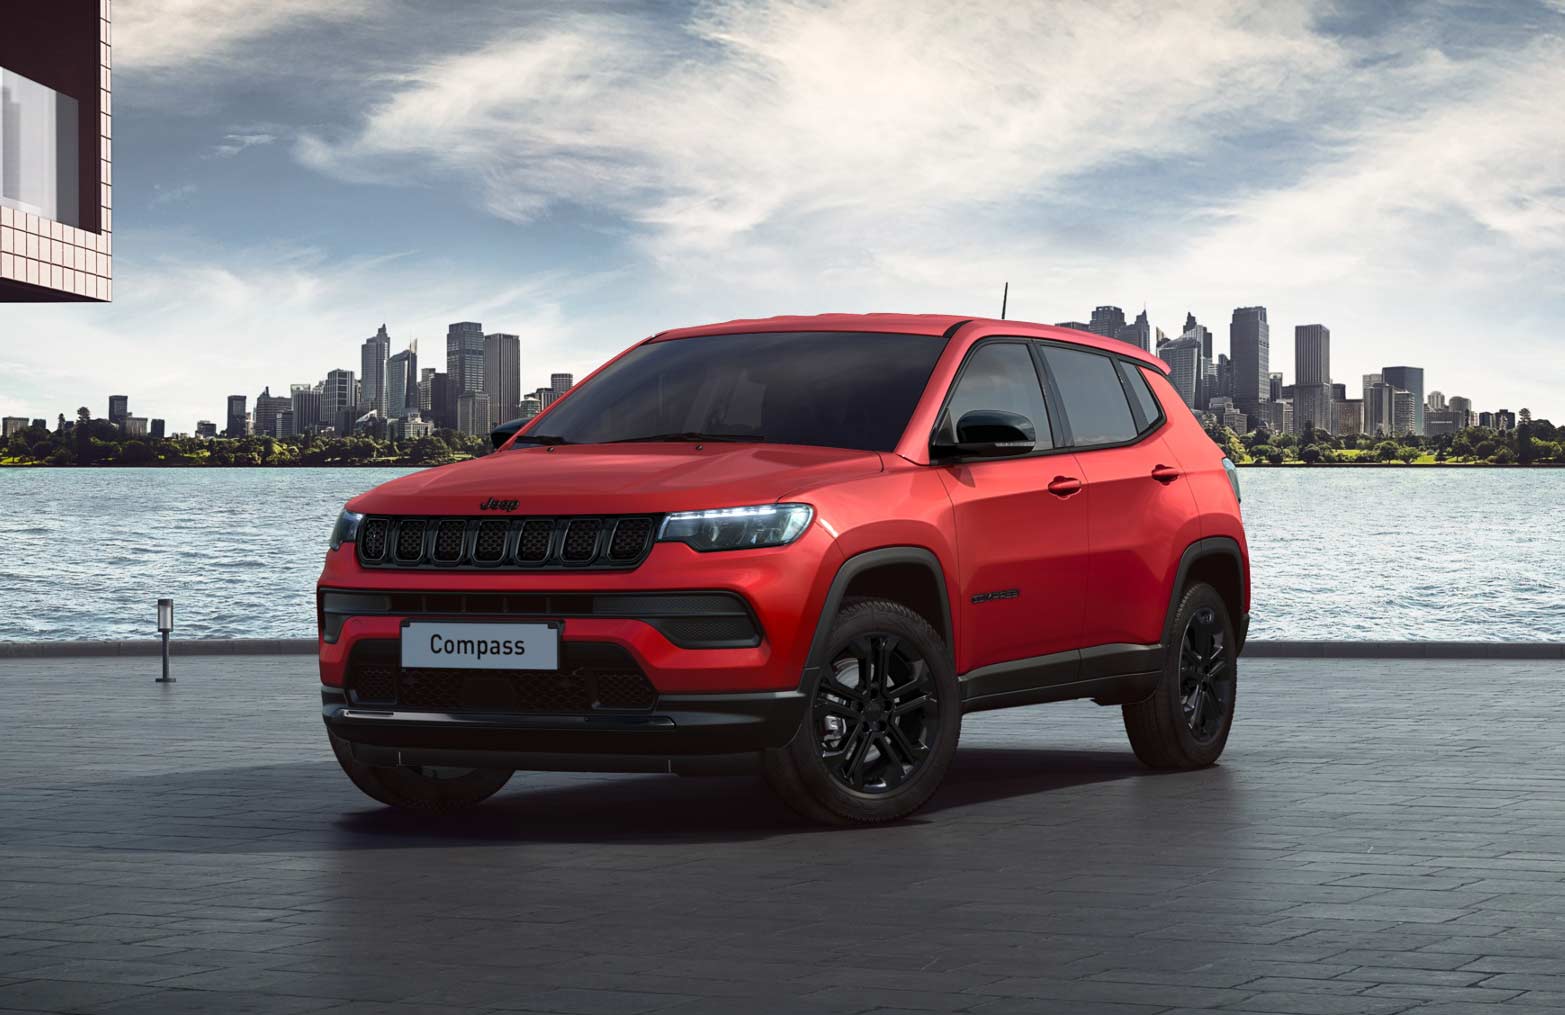 Oferta renting Jeep Compass Trailhawl Exterior